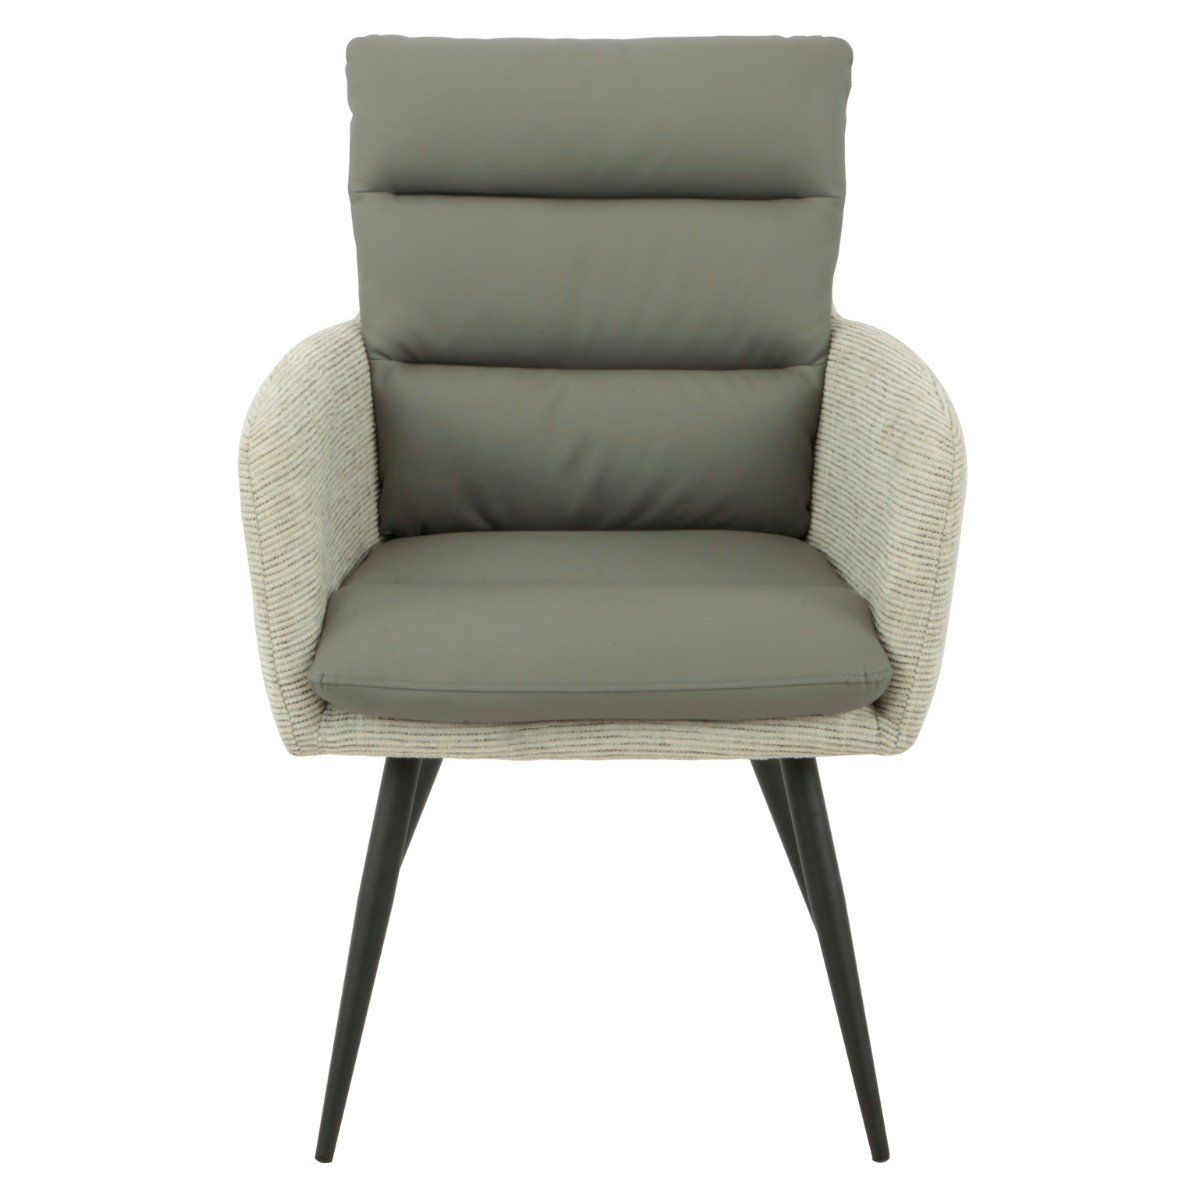 Cuckfield Two Tone Dining Chair - 2